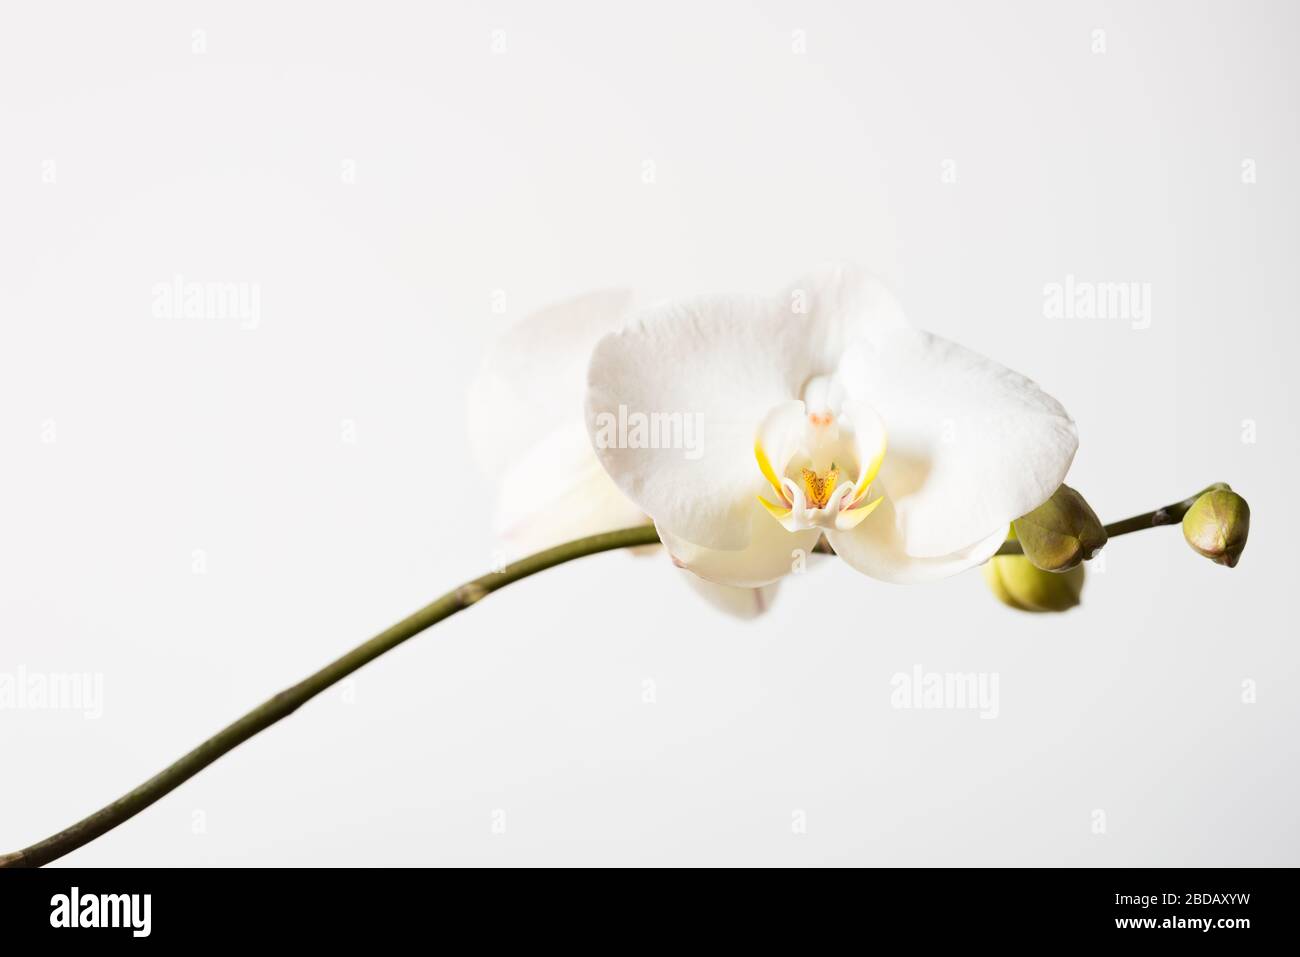 White orchid flower isolated. White minimal floral background with copy space. Simplicity concept. Stock Photo